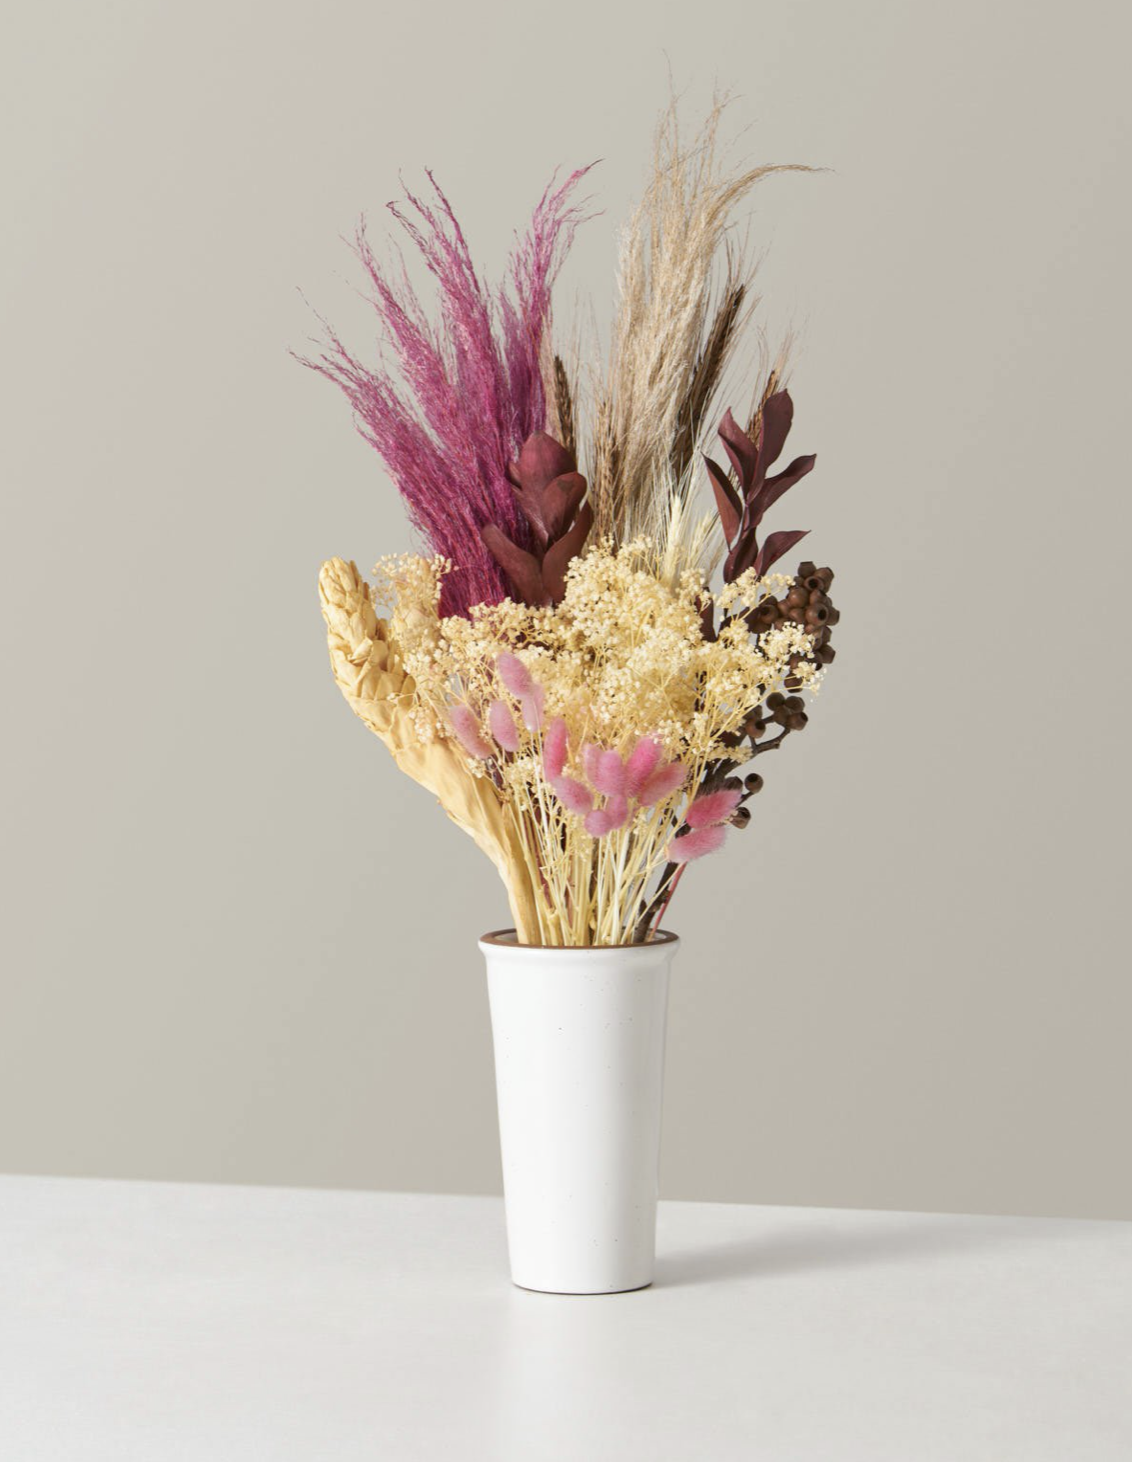 LIST: Where To Buy Pretty Dried Flowers Online